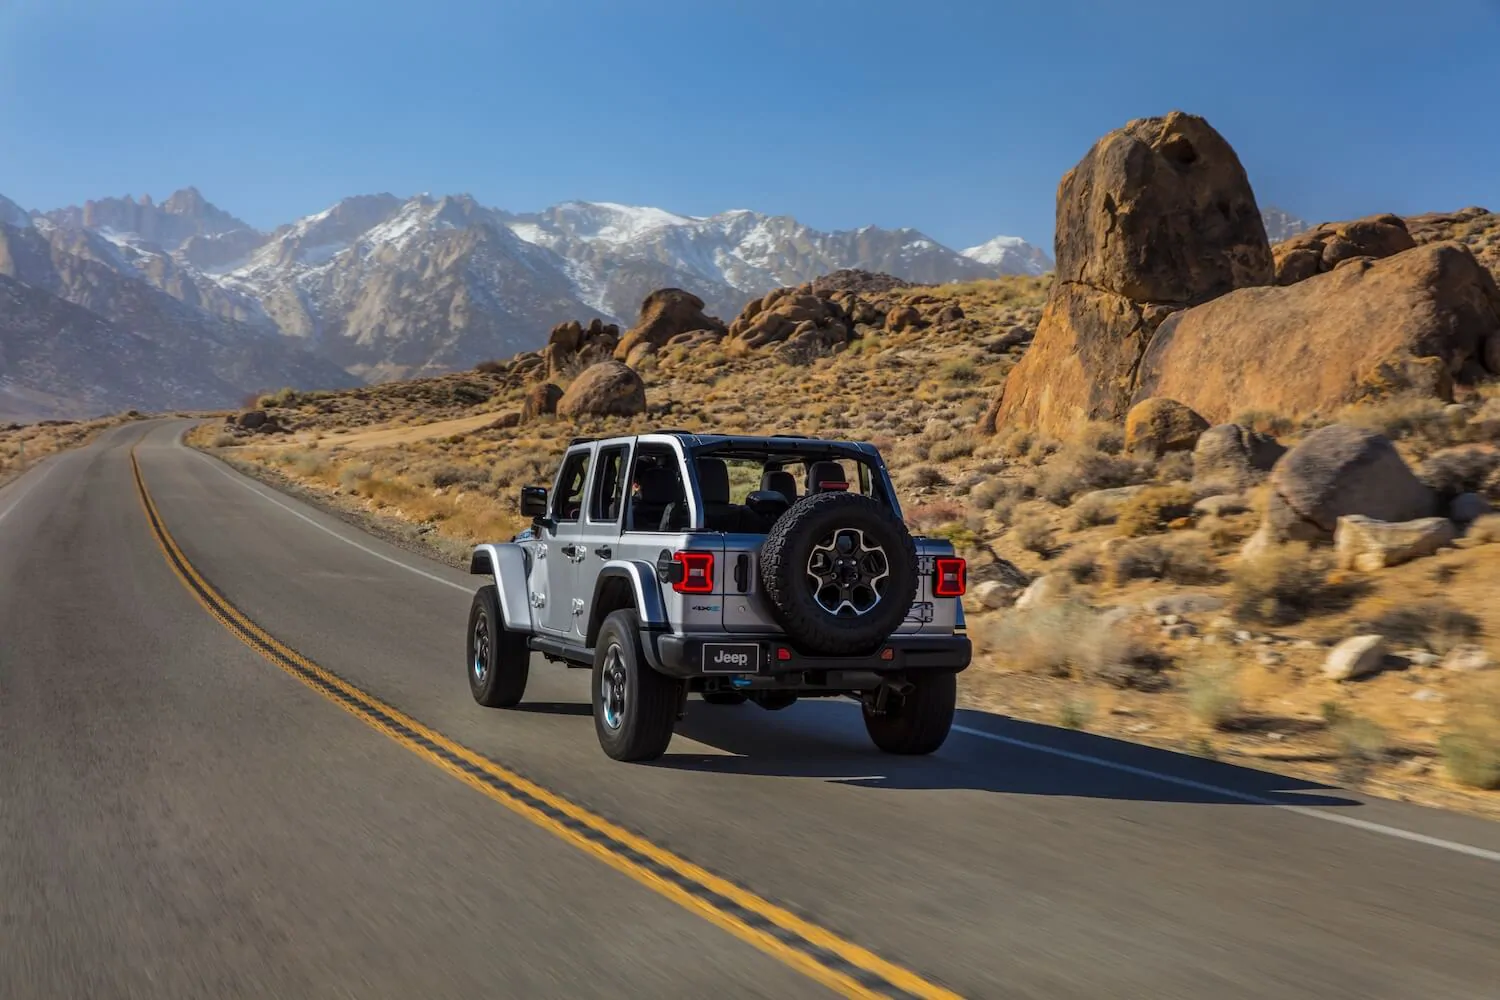 Best Tires for a Jeep Wrangler Daily Driver In 2022 - The Dirt by 4WP